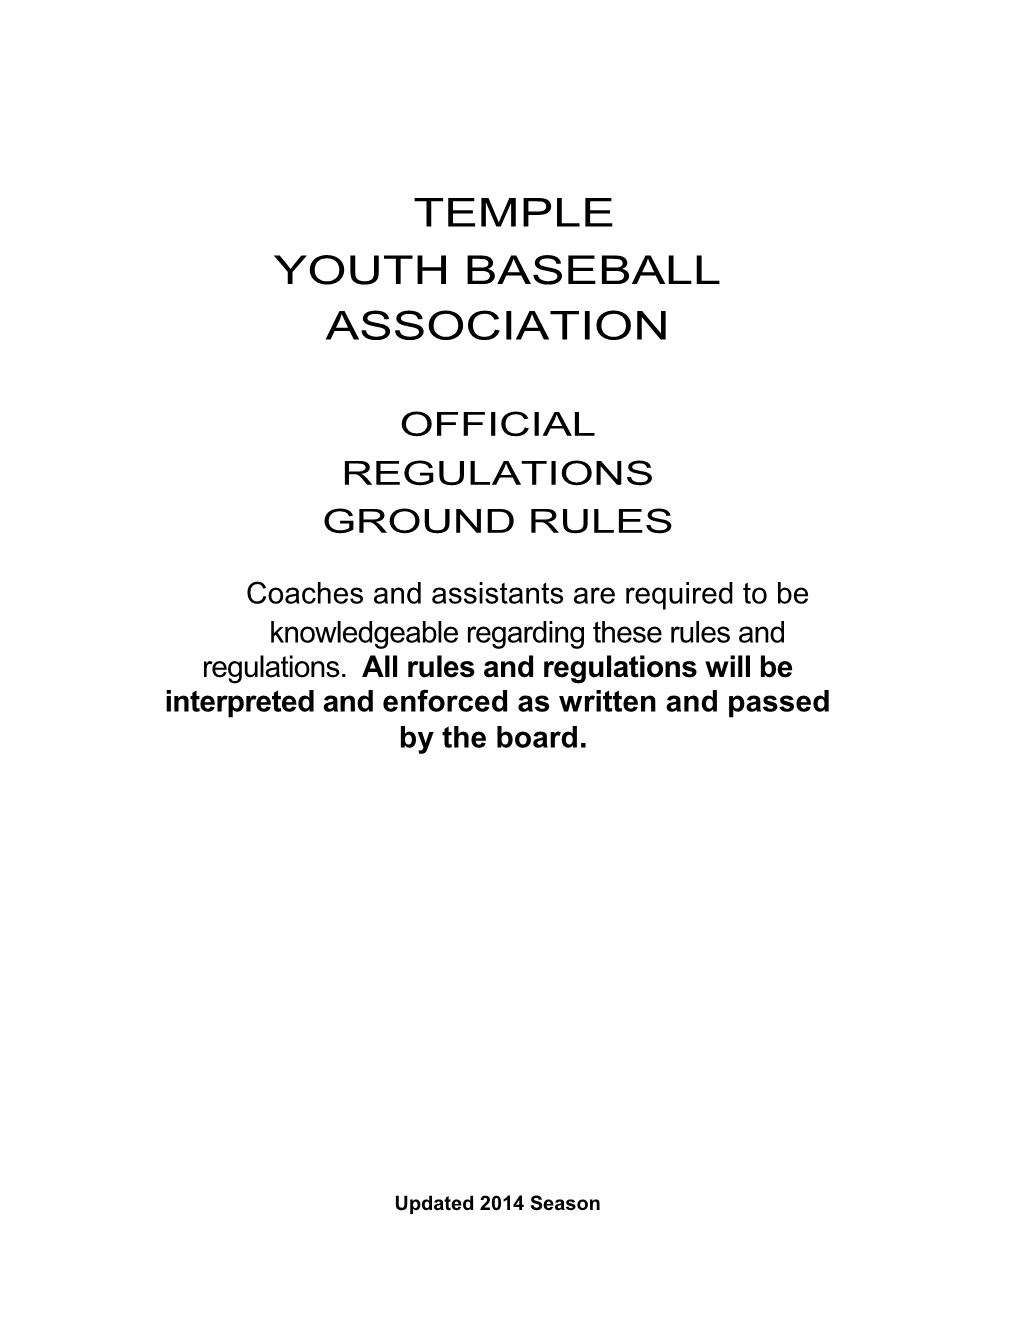 Coaches and Assistants Are Required to Be